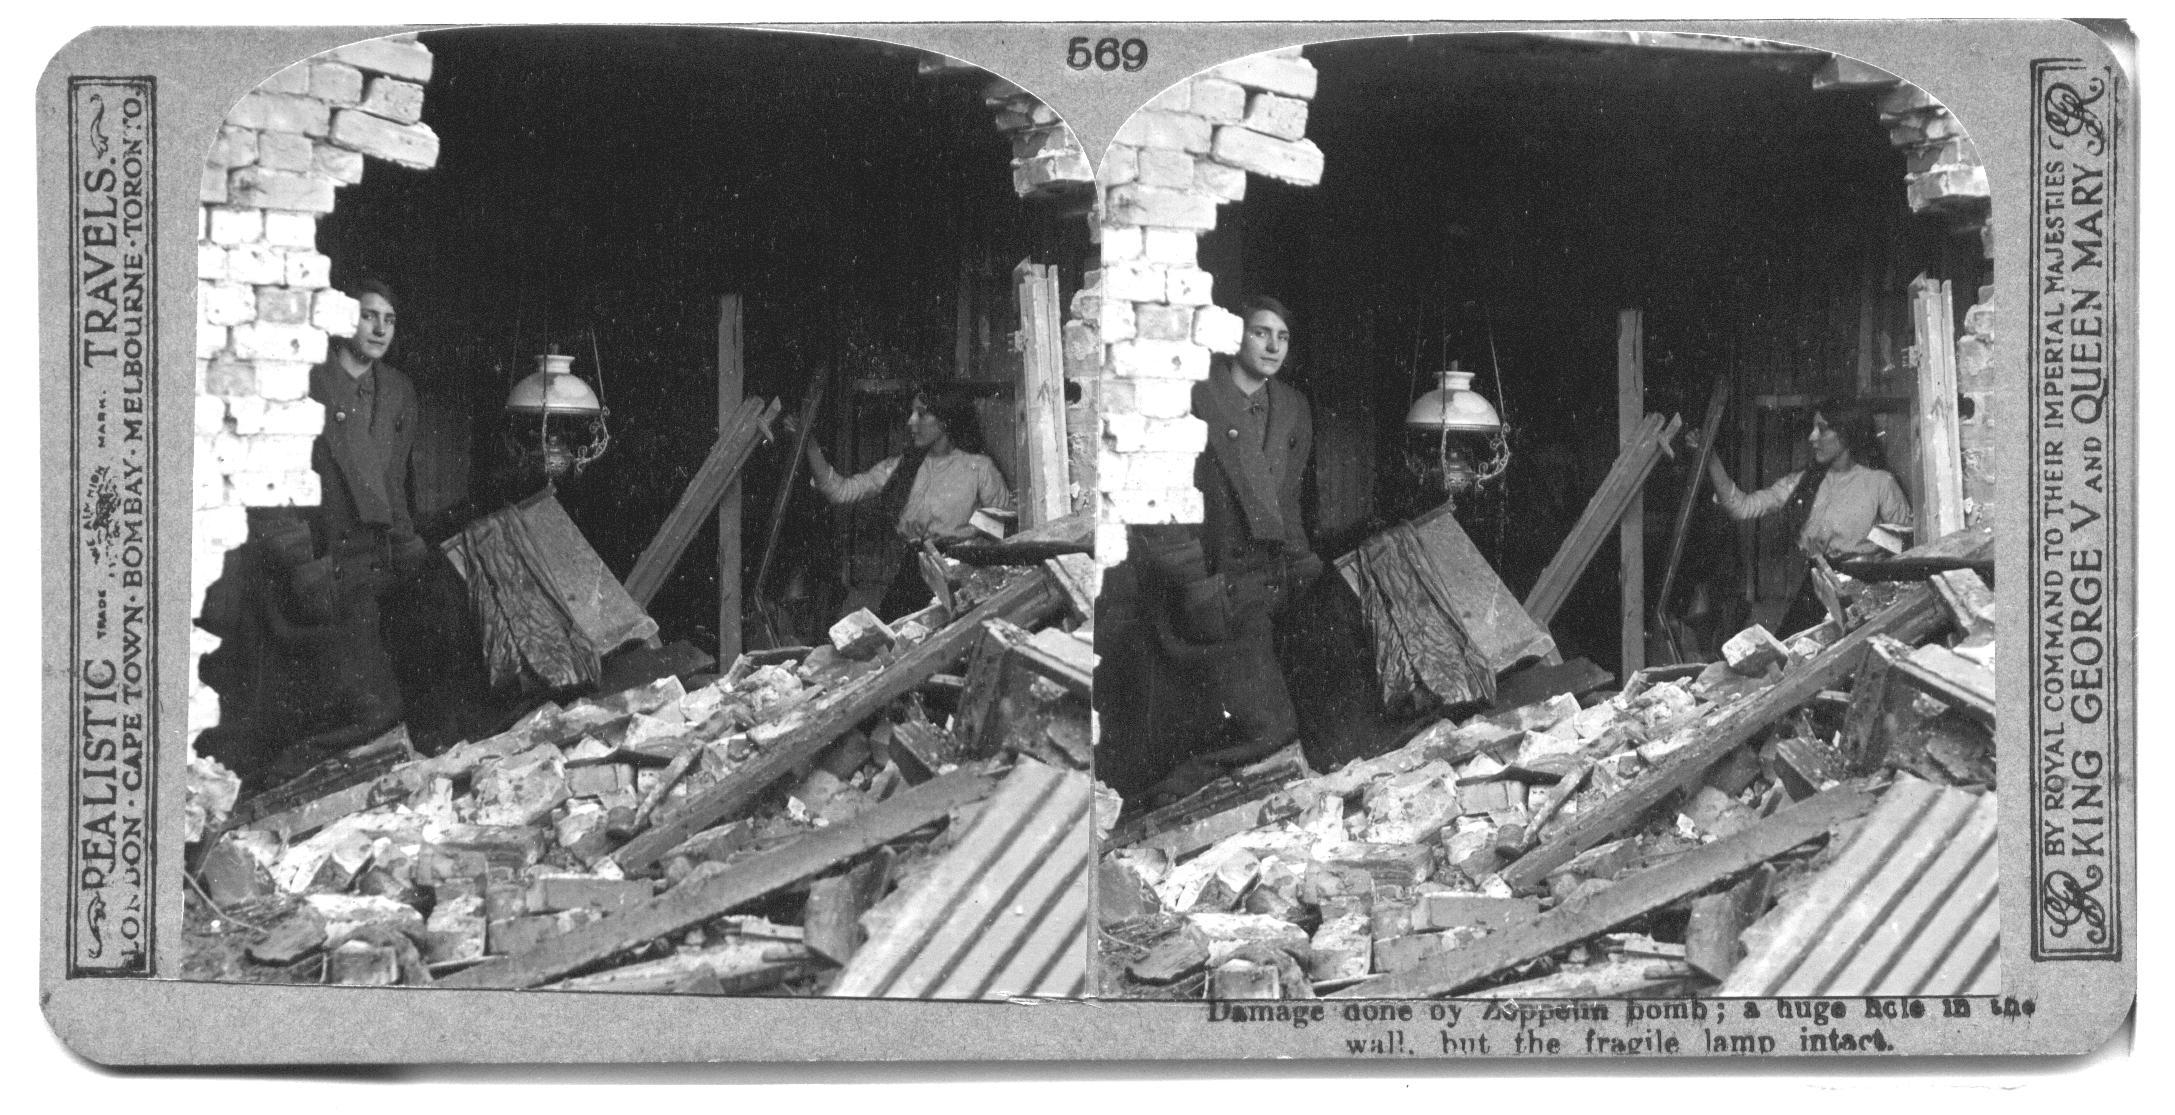 Damage done by Zeppelin bomb; a huge hole in the wall, but the fragile lamp intact